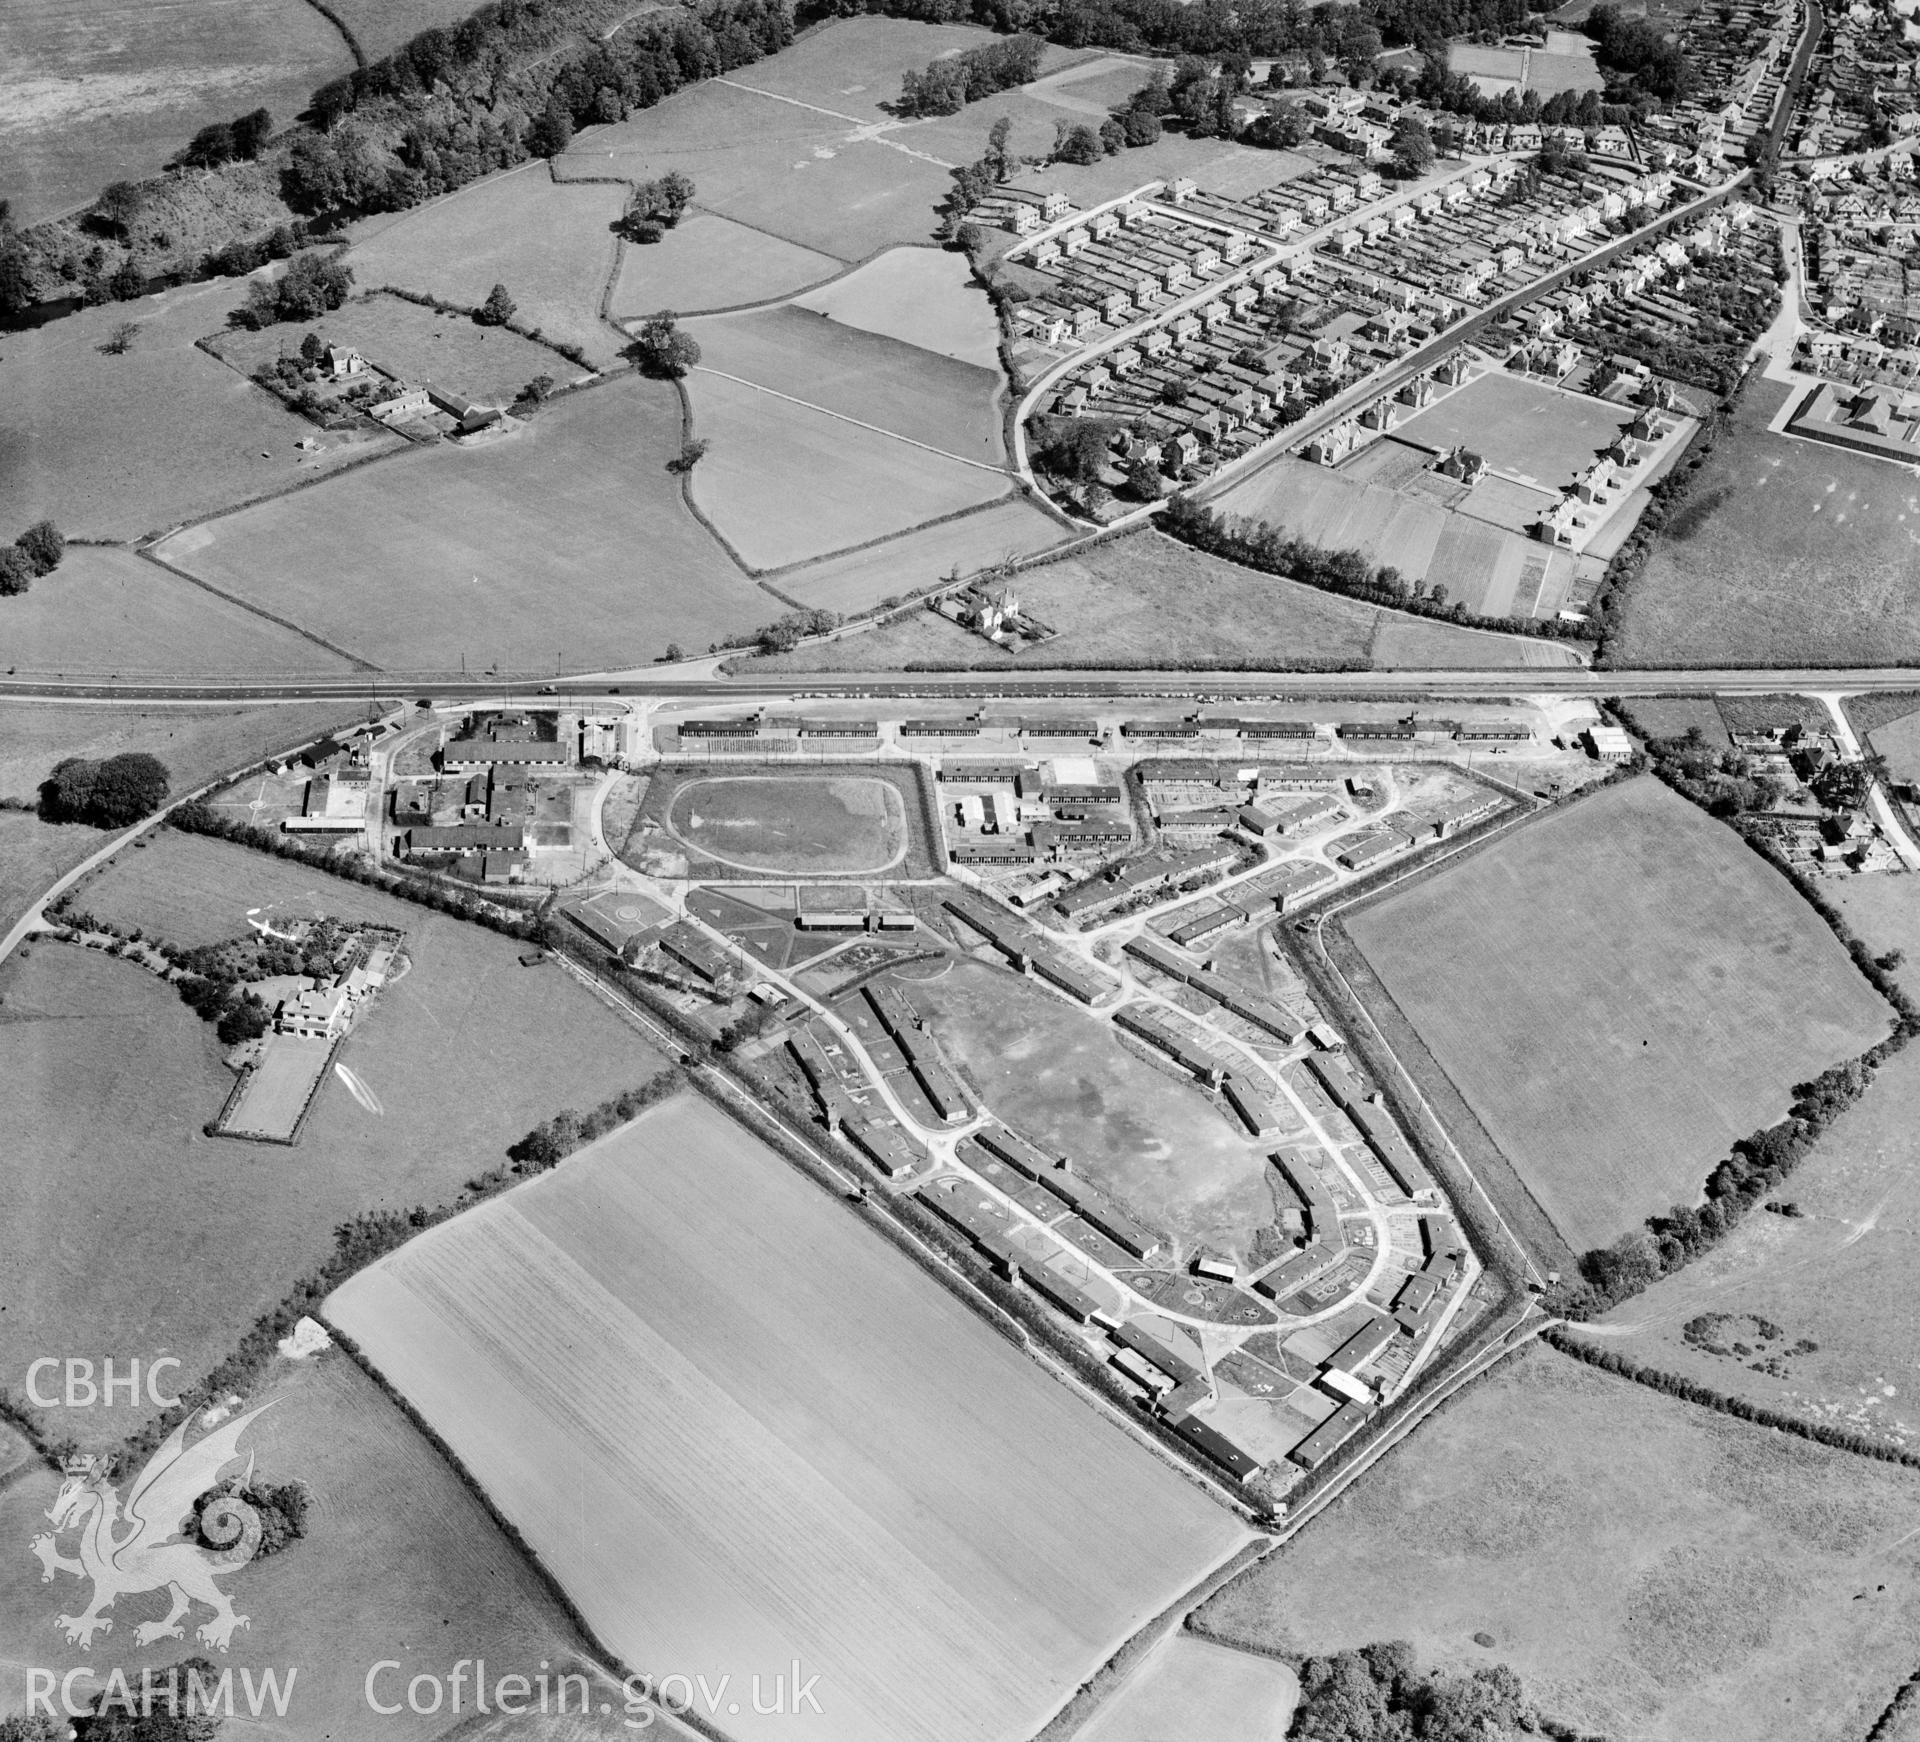 View of Island Farm POW camp - the photograph was commissioned by the Gee, Walker & Slater construction company in 1947 for possible reuse as a development site for new housing.